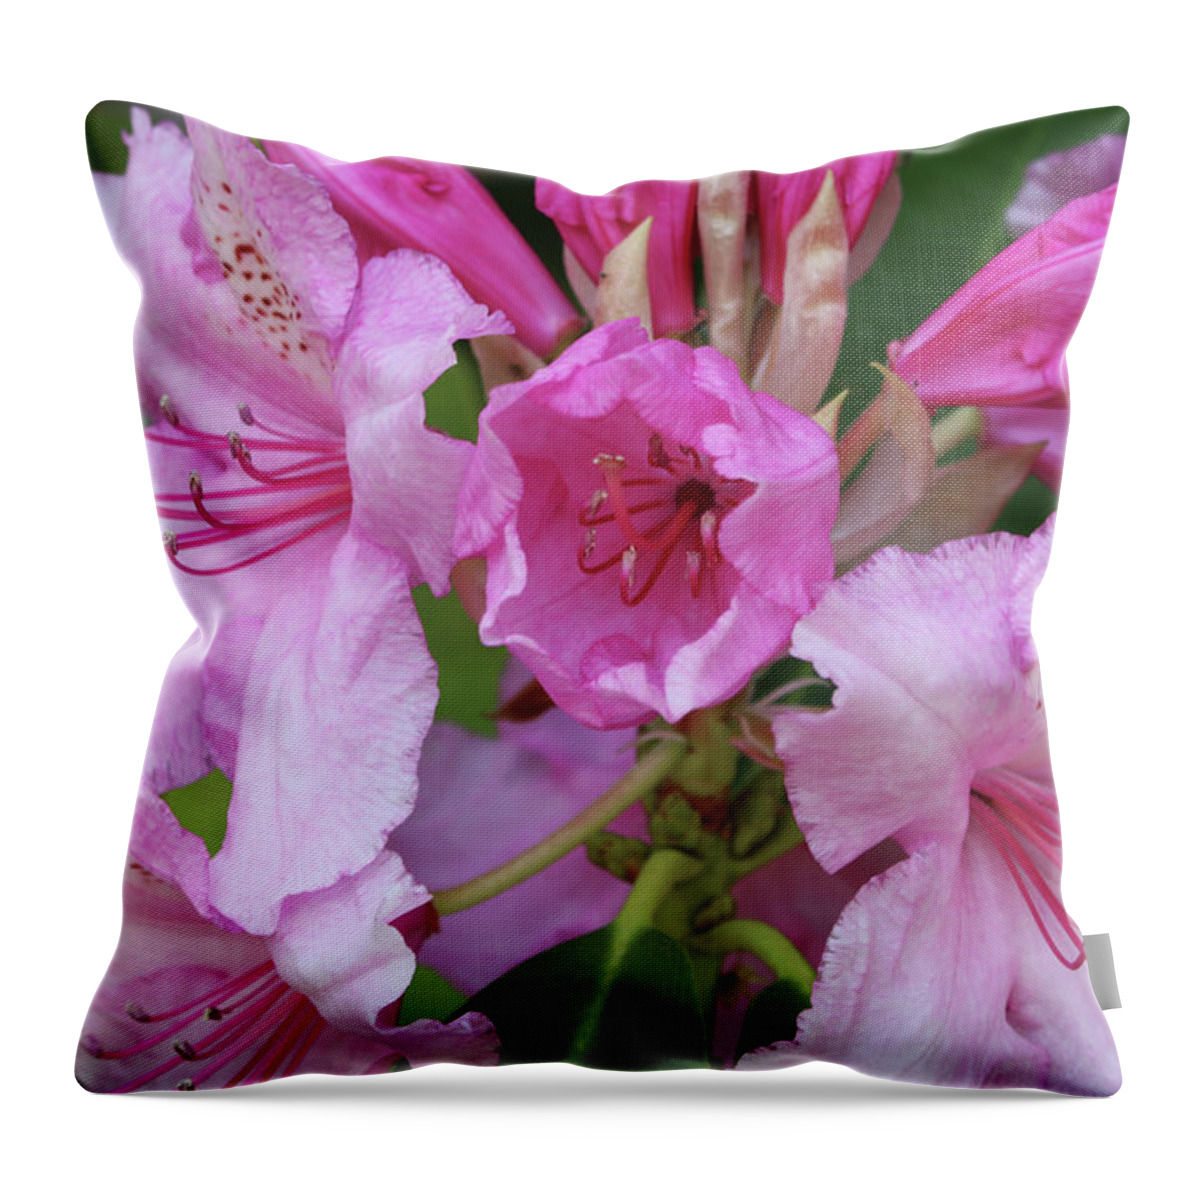 Rhododendron Throw Pillow featuring the photograph New Rhododendron Bloom by Jeanette C Landstrom